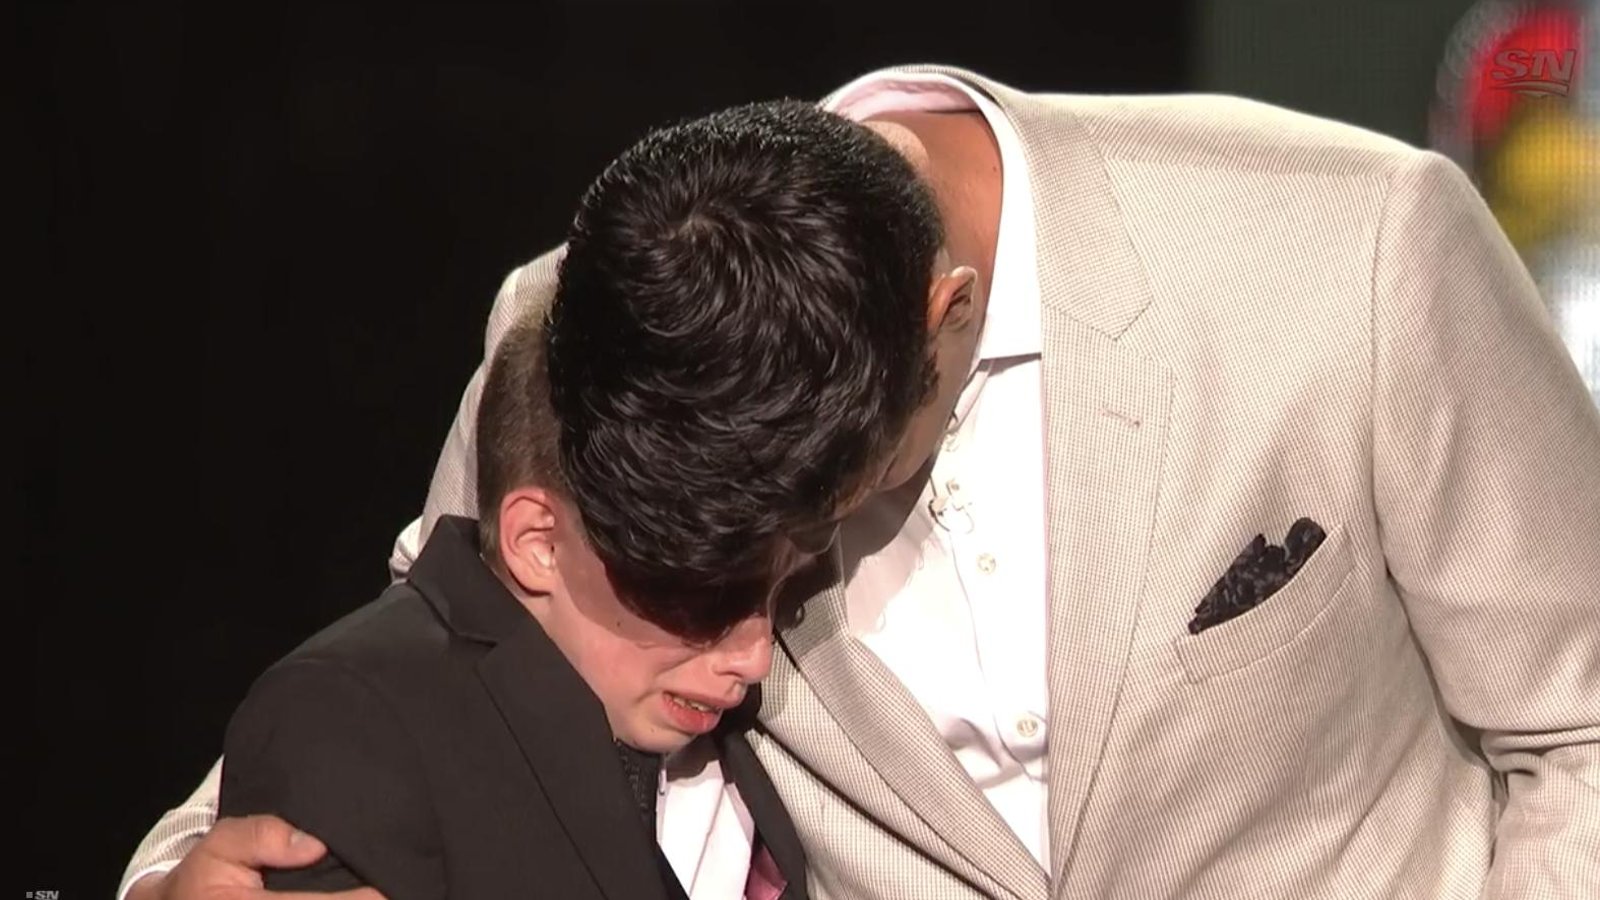 Price surprises young fan at NHL Awards in emotional moment